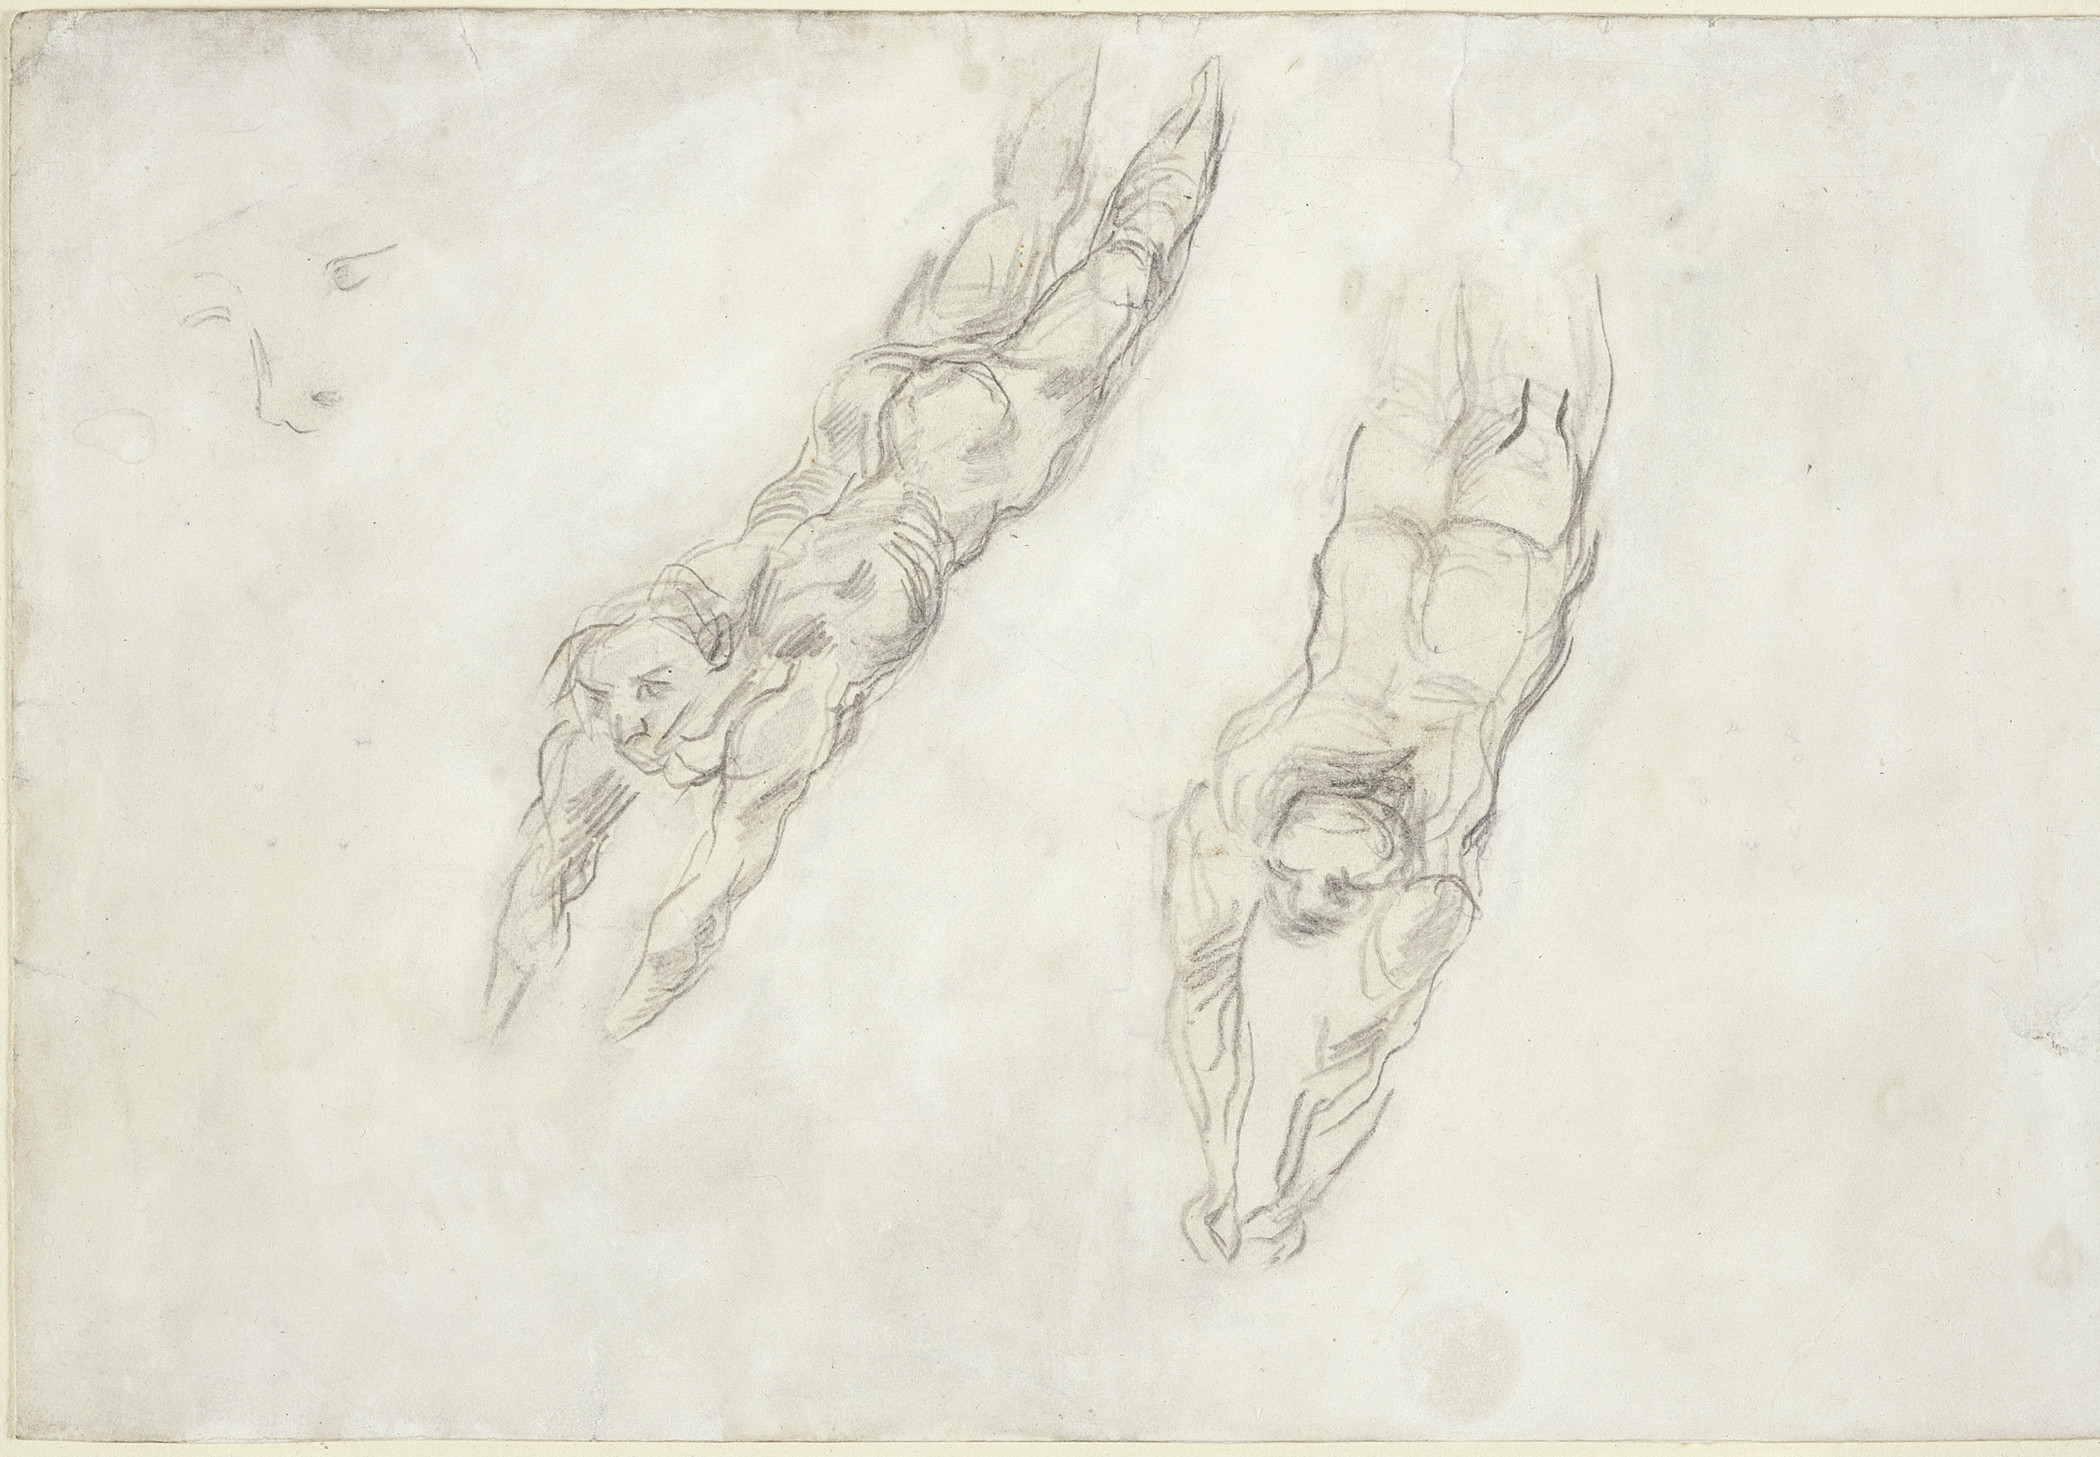 Paul Cézanne, Study of Nudes Diving, c. 1863–66, Los Angeles County Museum of Art, Mr. and Mrs. William Preston Harrison Collection, photo © Museum Associates/LACMA